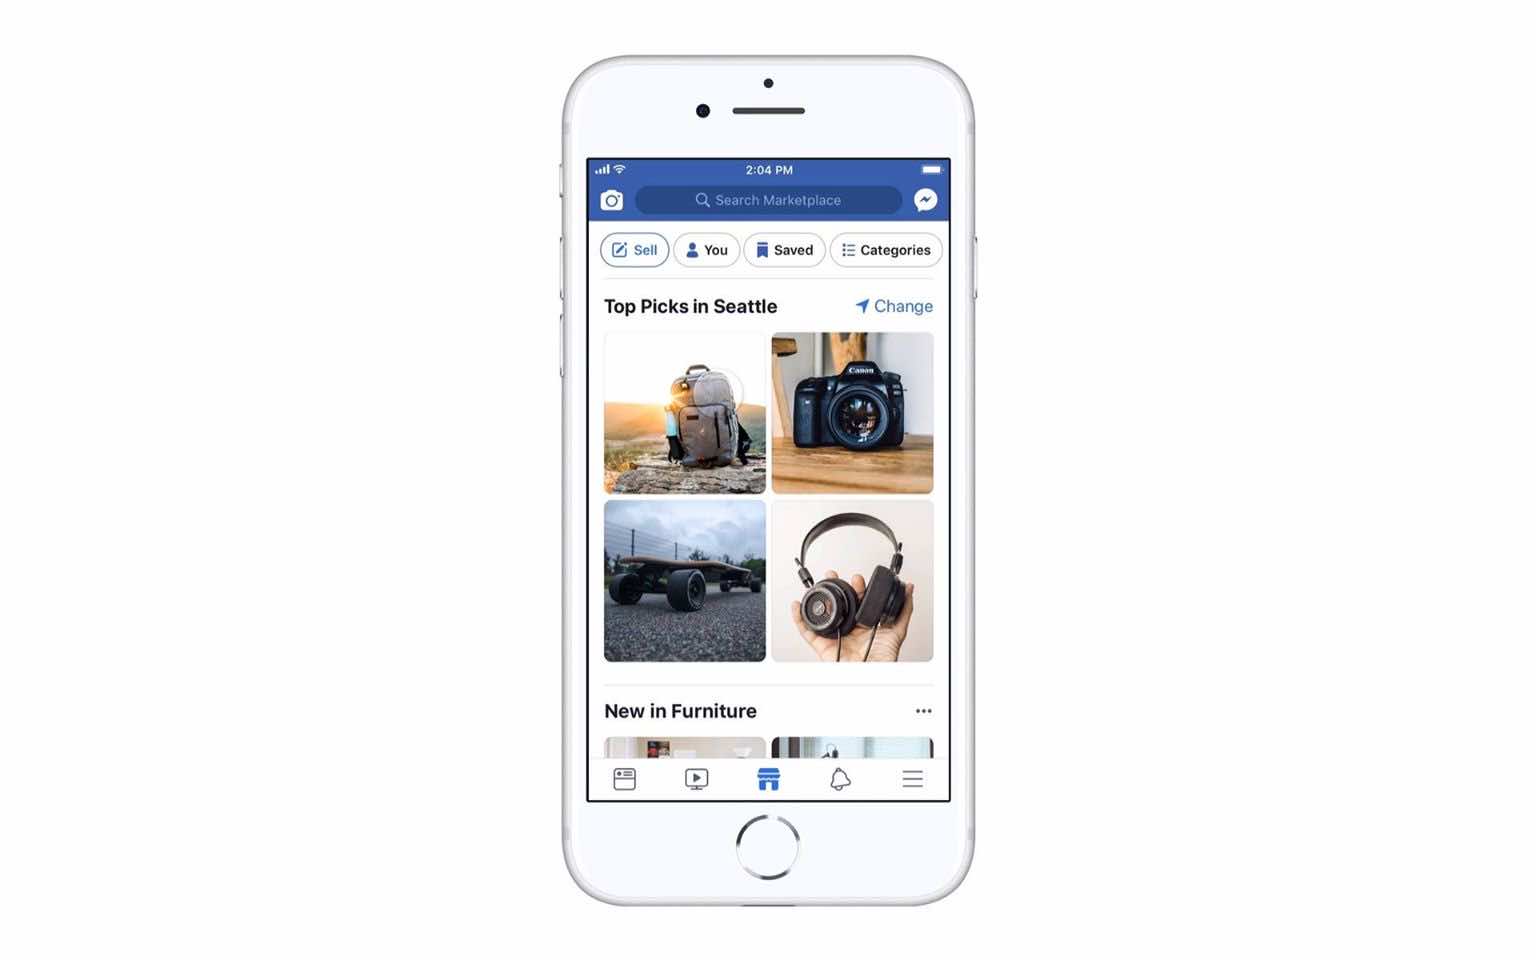 Facebook Marketplace gets artificial intelligence features